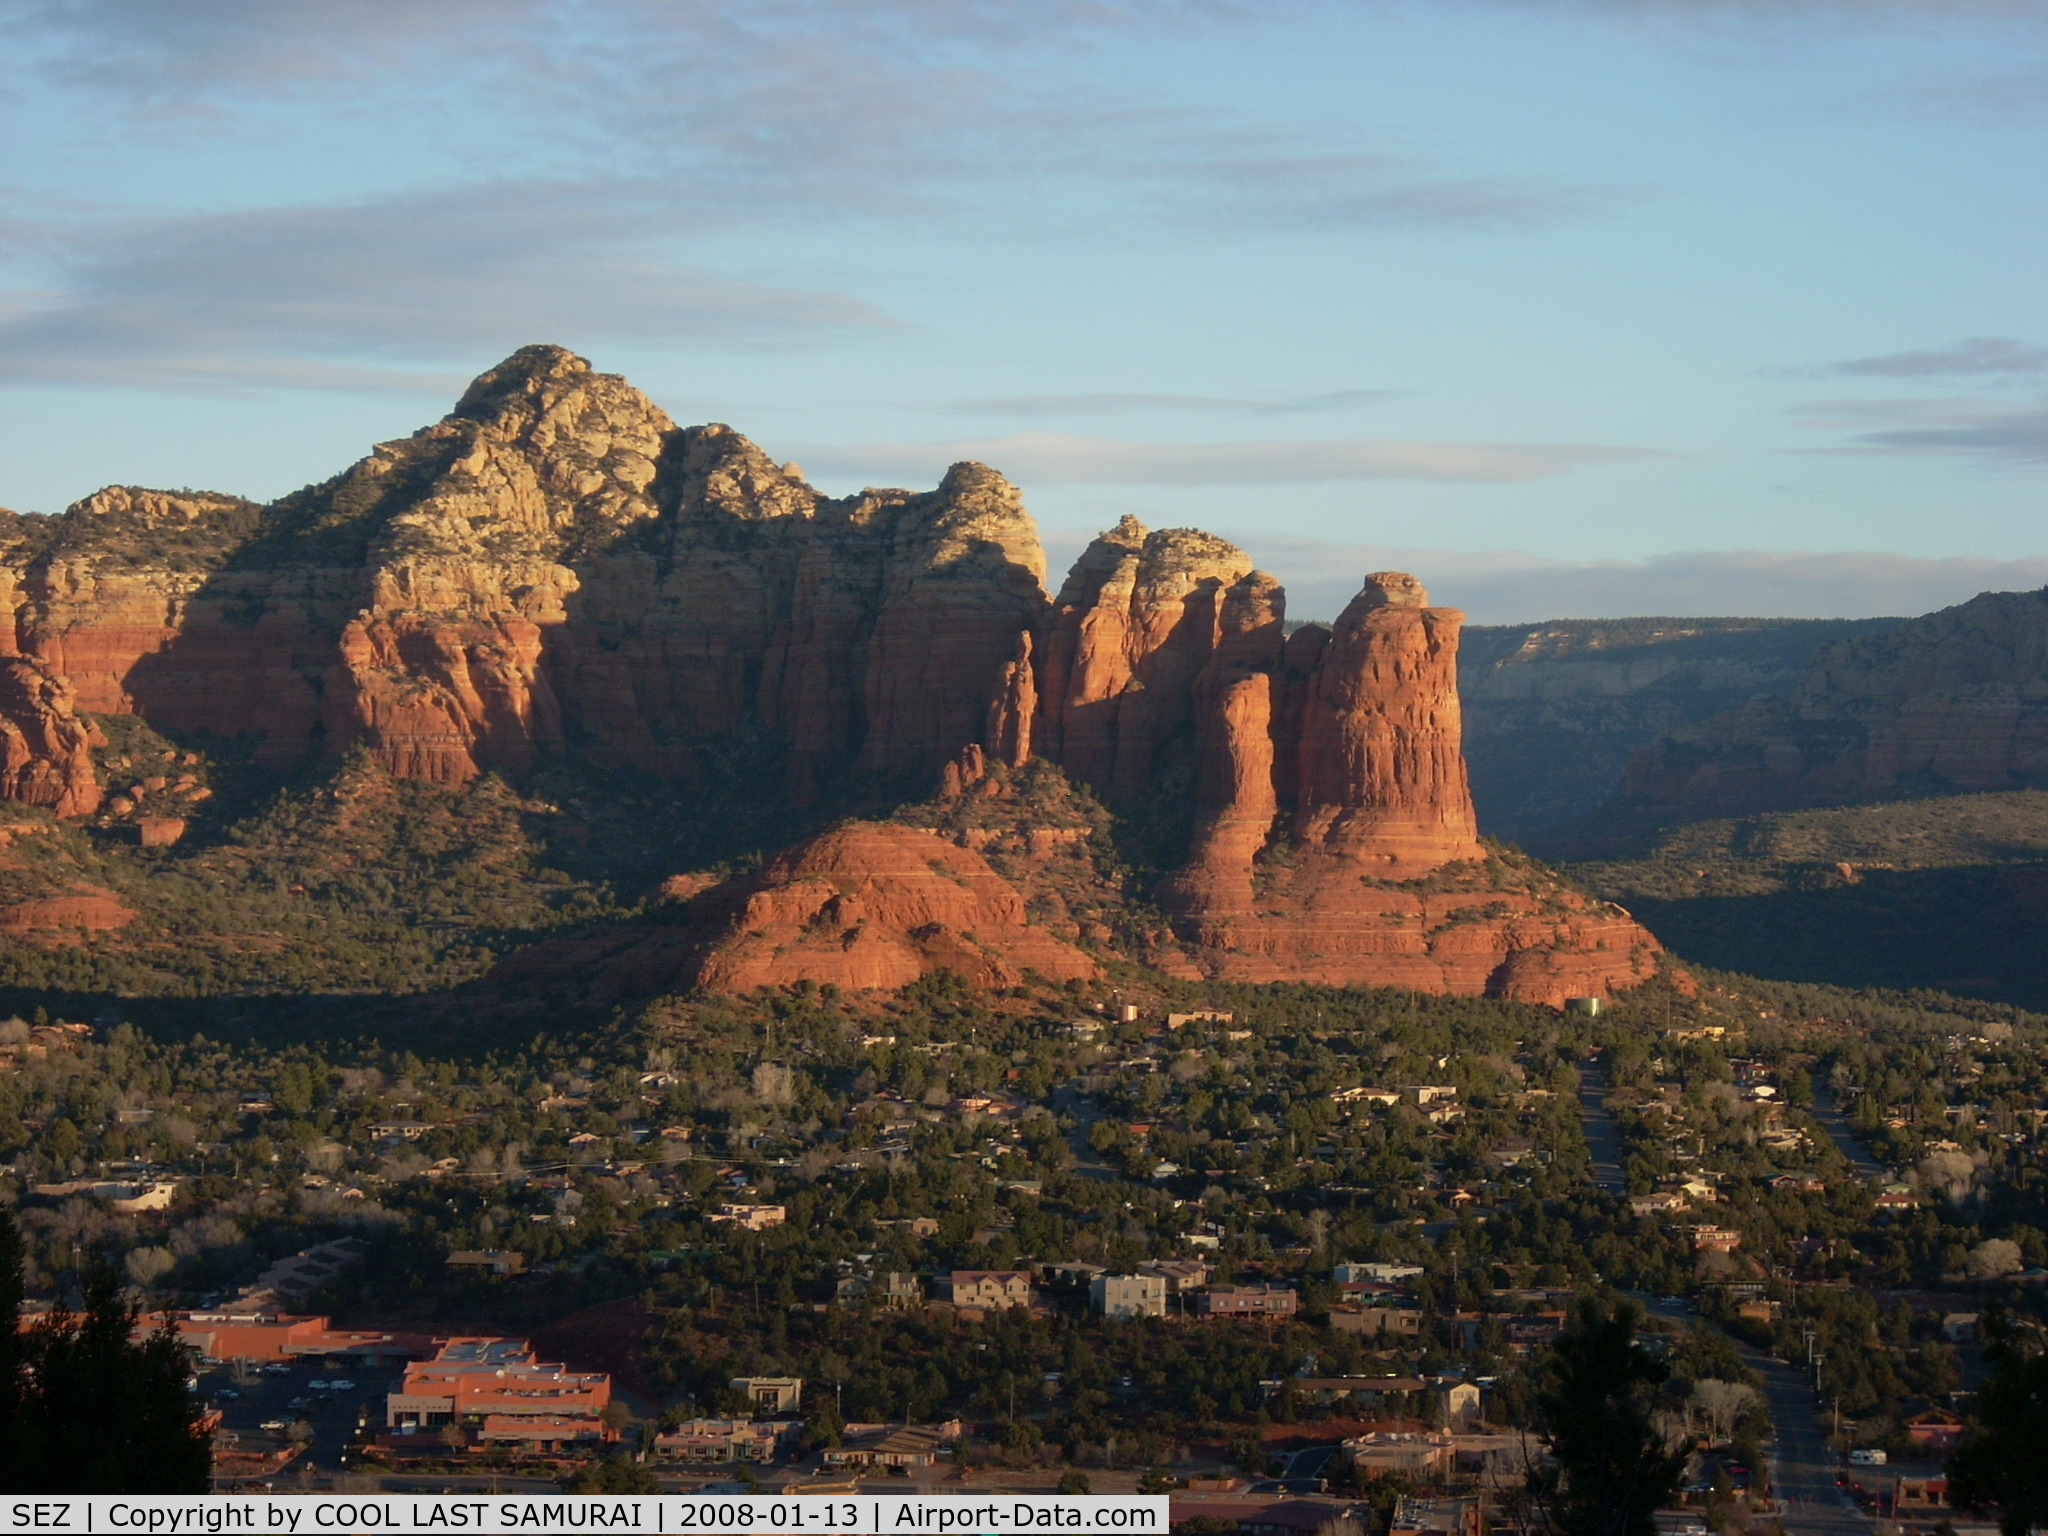 Sedona Airport (SEZ) - A view from Sky Ranch Lodge, located right adjacent to SEZ Terminal